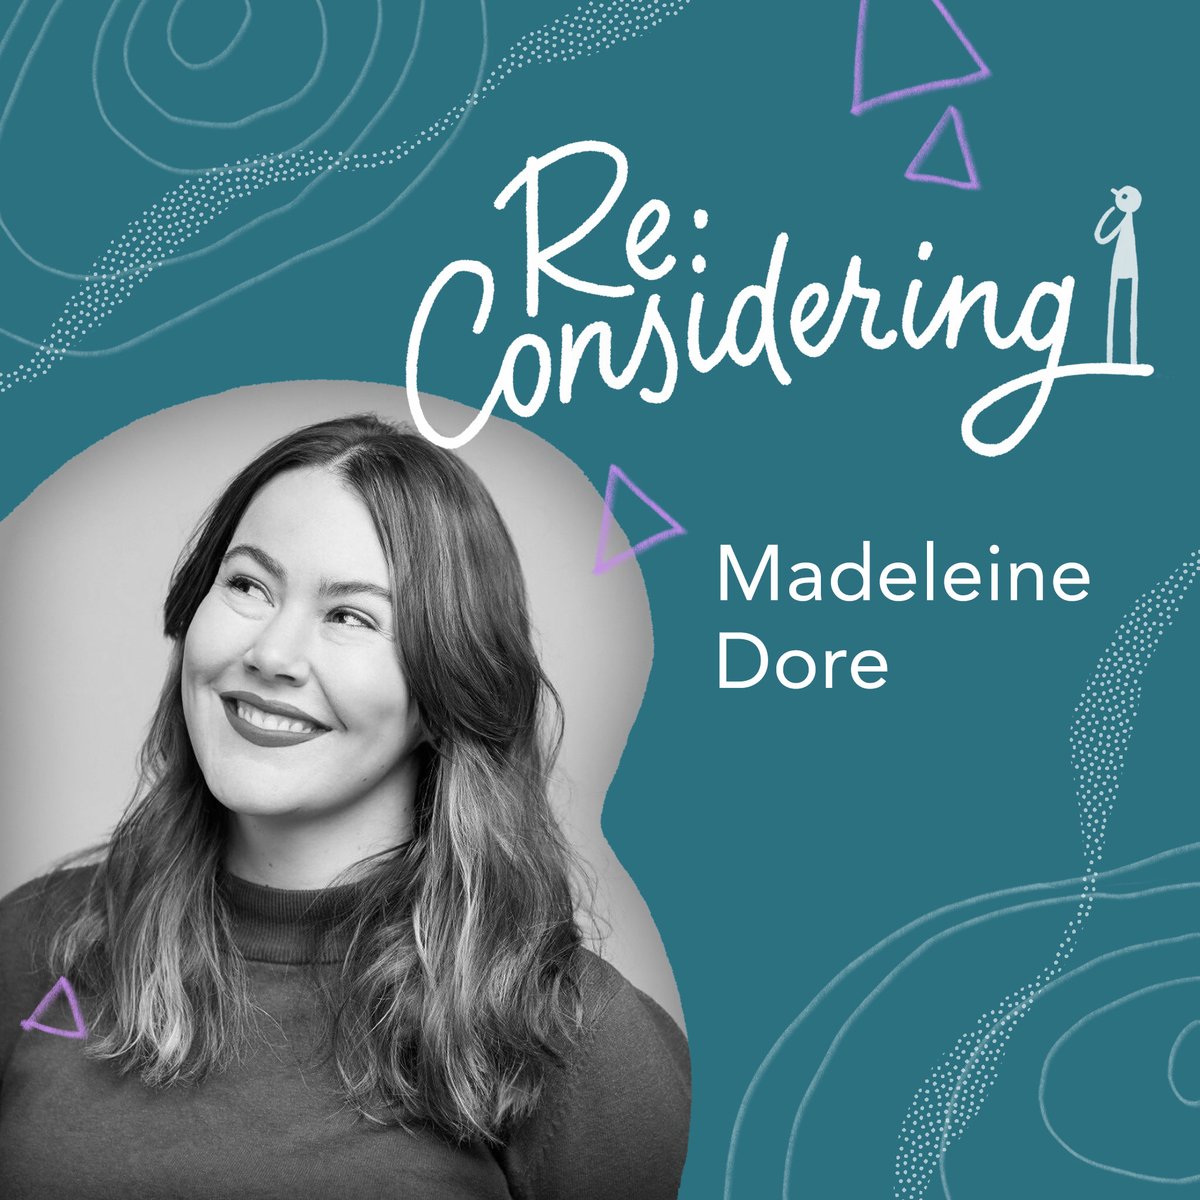 It's hard to align productivity intentions and actions this time of year. In the latest ep of @reconsider_pod we talk w/ Madeleine Dore author of I Didn't Do the Thing Today who says give up on productivity and the guilt it brings. #podcast Listen here: reconsidering.org/episodes/29